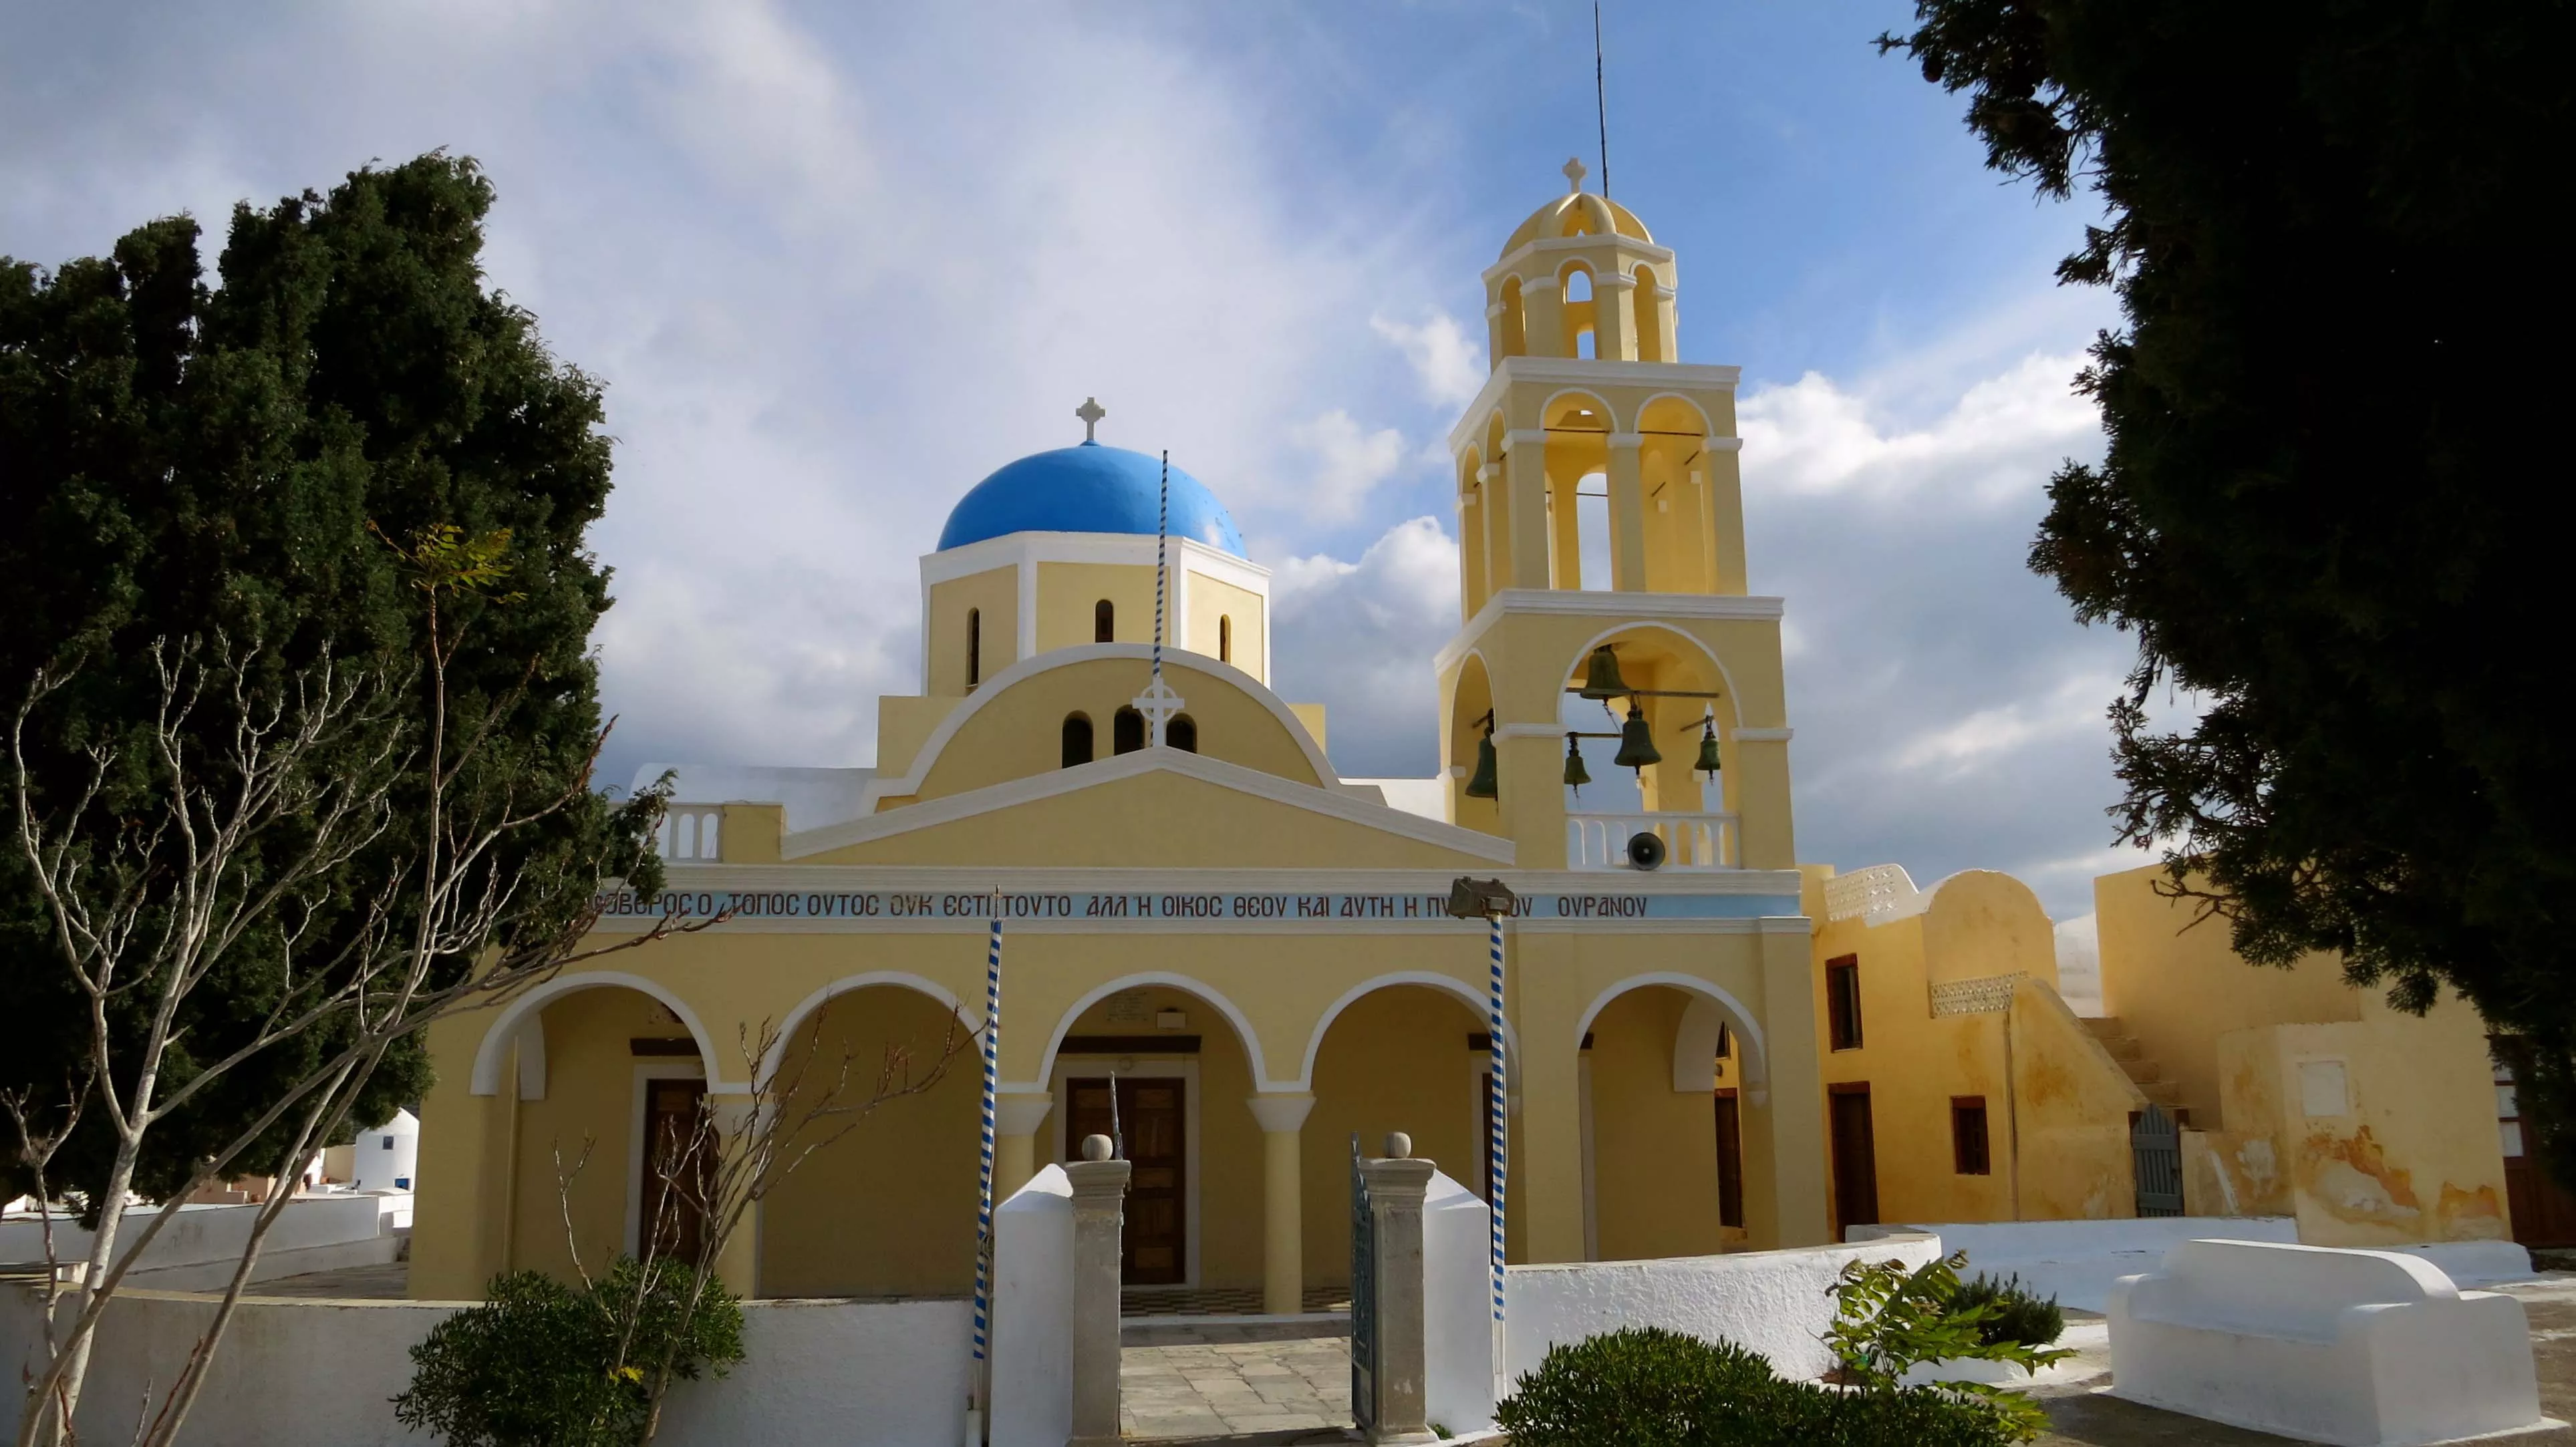 Saint George Oia Holy Orthodox Church in Greece, Europe | Architecture - Rated 0.9